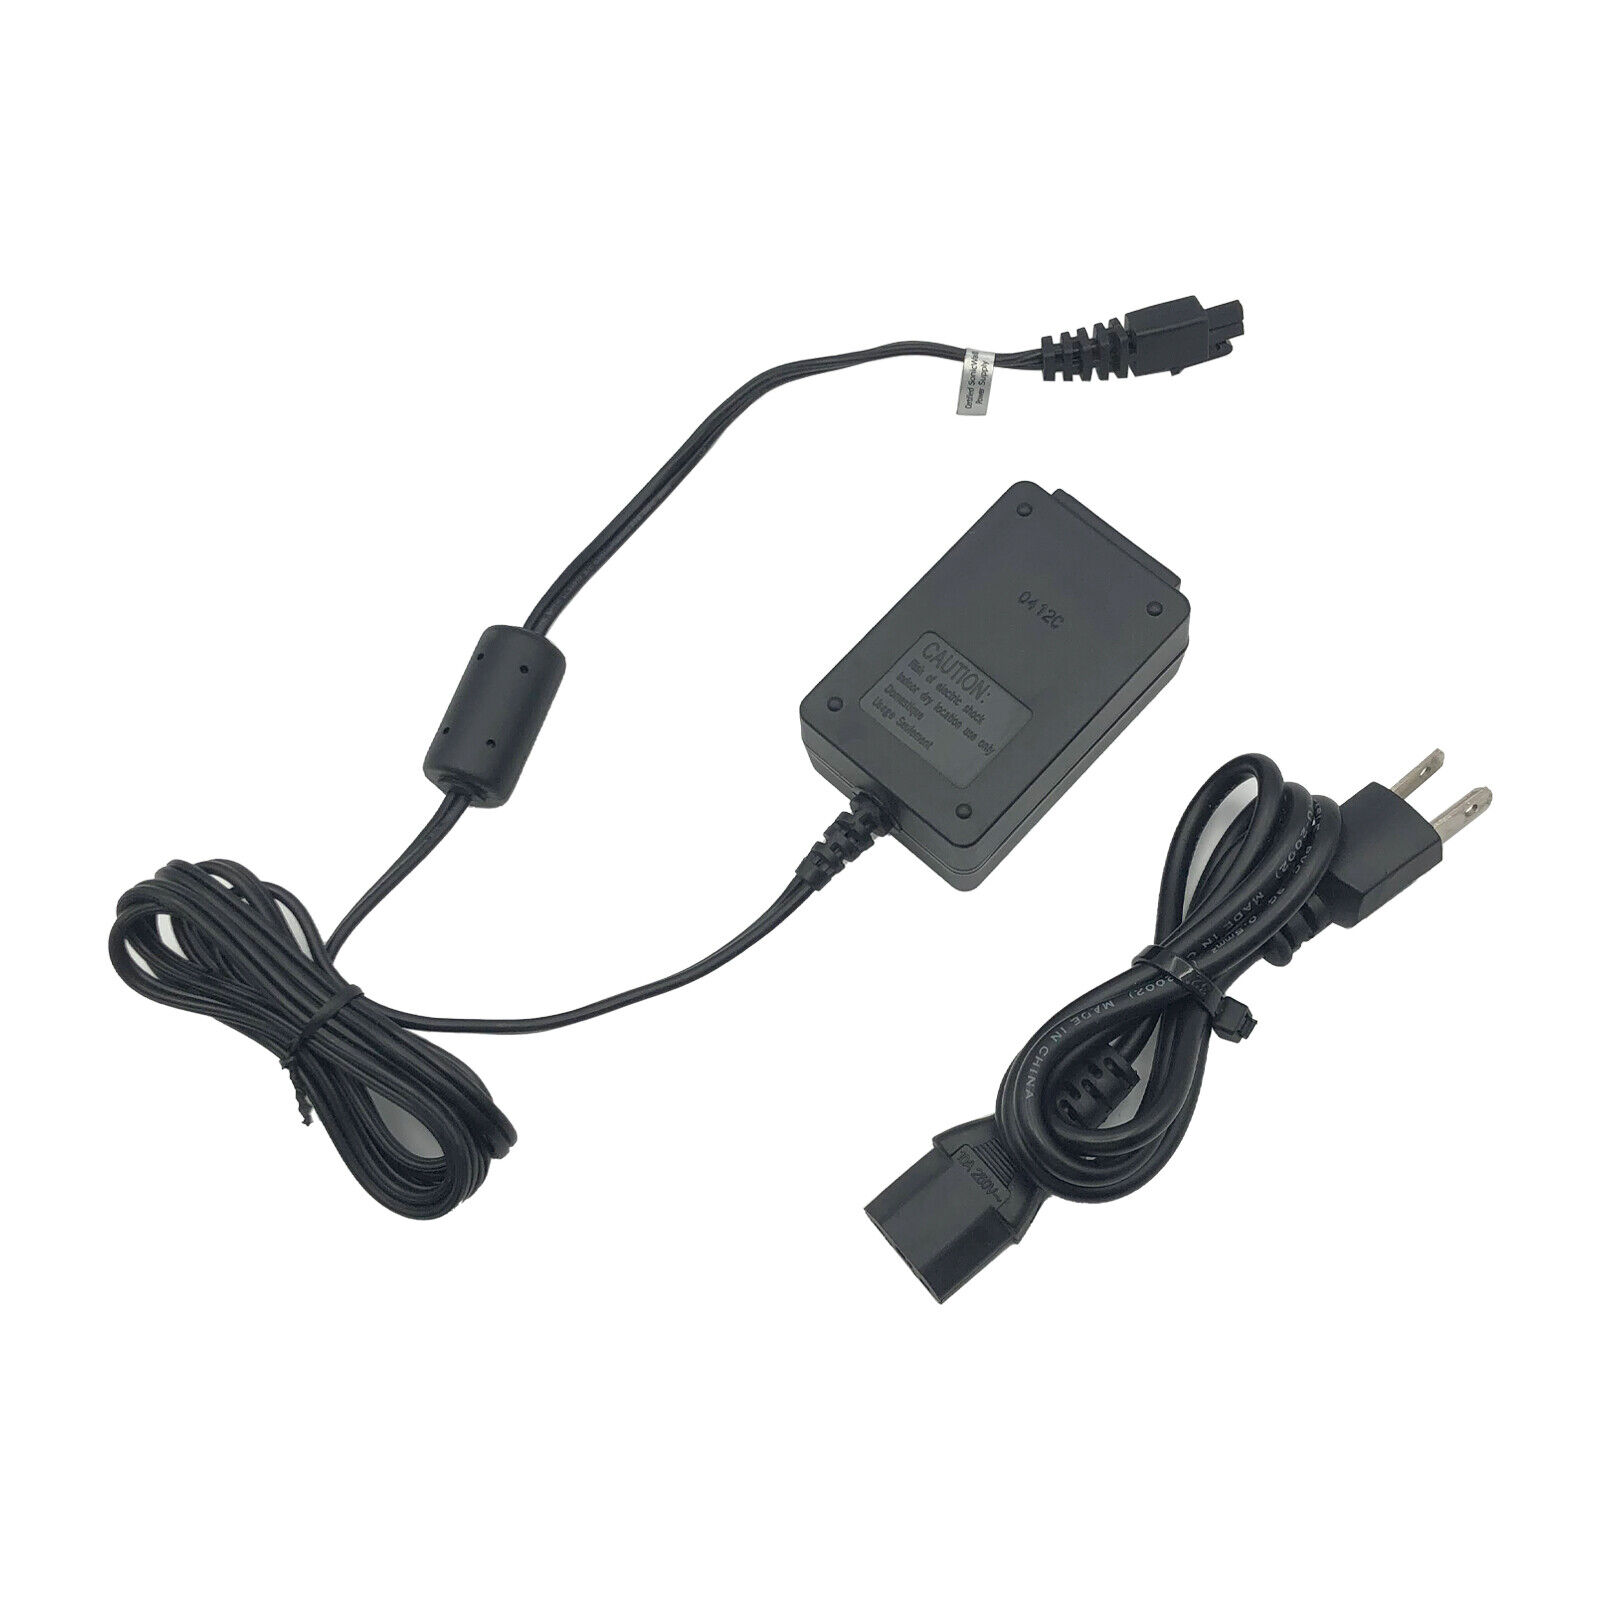 Quality PA-150B AC Adapter Power Supply Cord Cable Charger 12V 1.5A Brand: Unbranded Type: AC/AC Adapter Output Volt - Click Image to Close